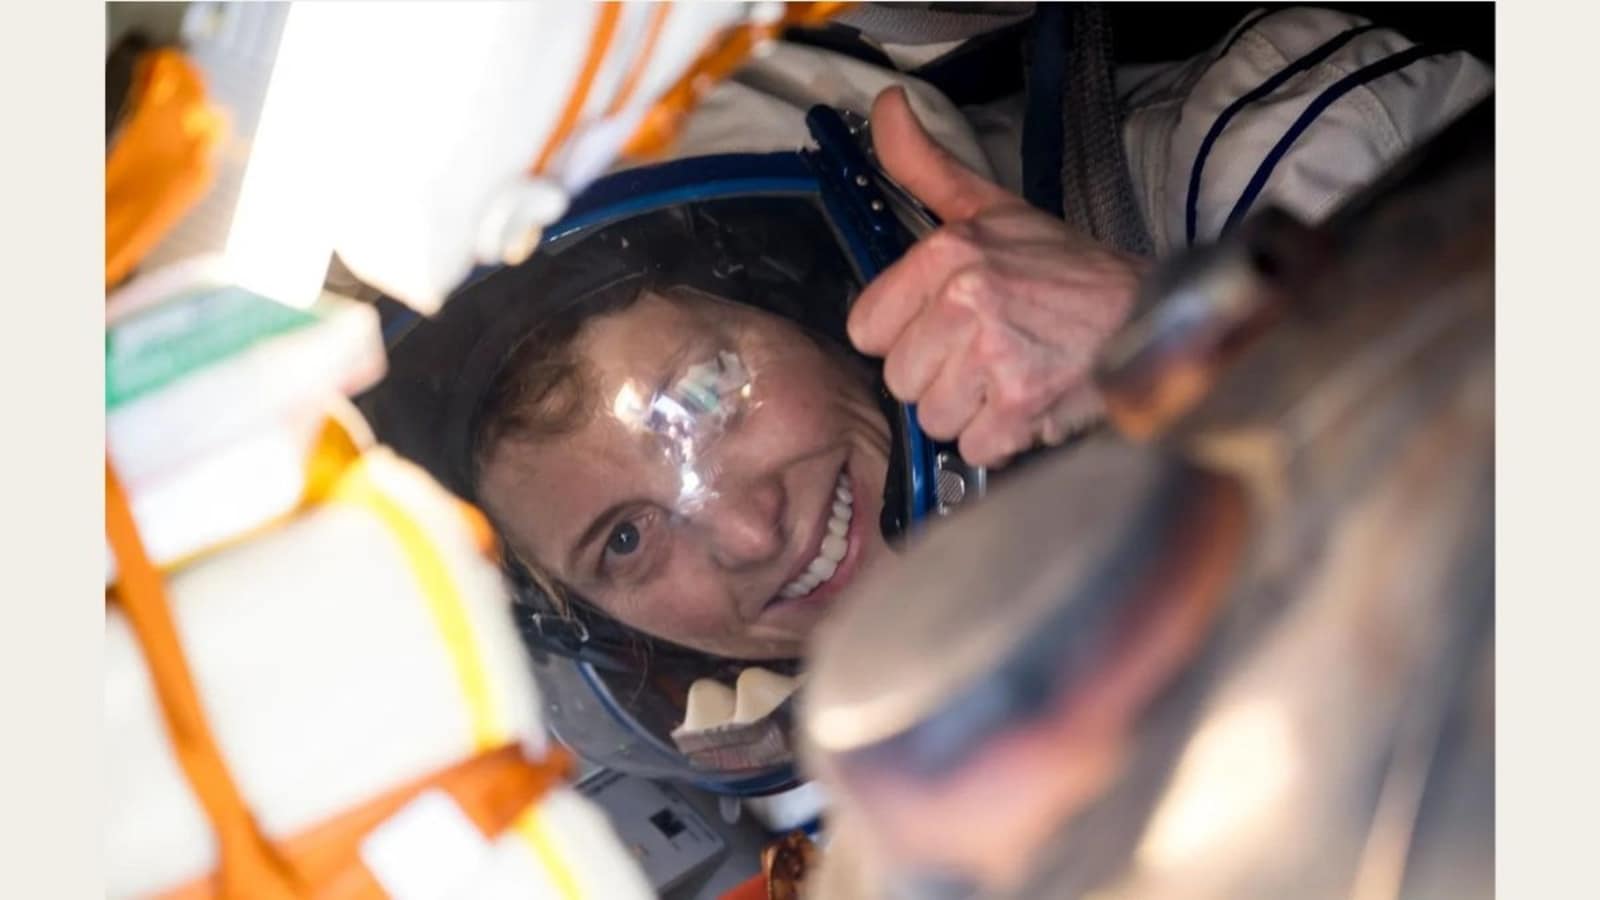 NASA Astronaut Loral O’Hara and crew safely land back on Earth after 6-months space station mission